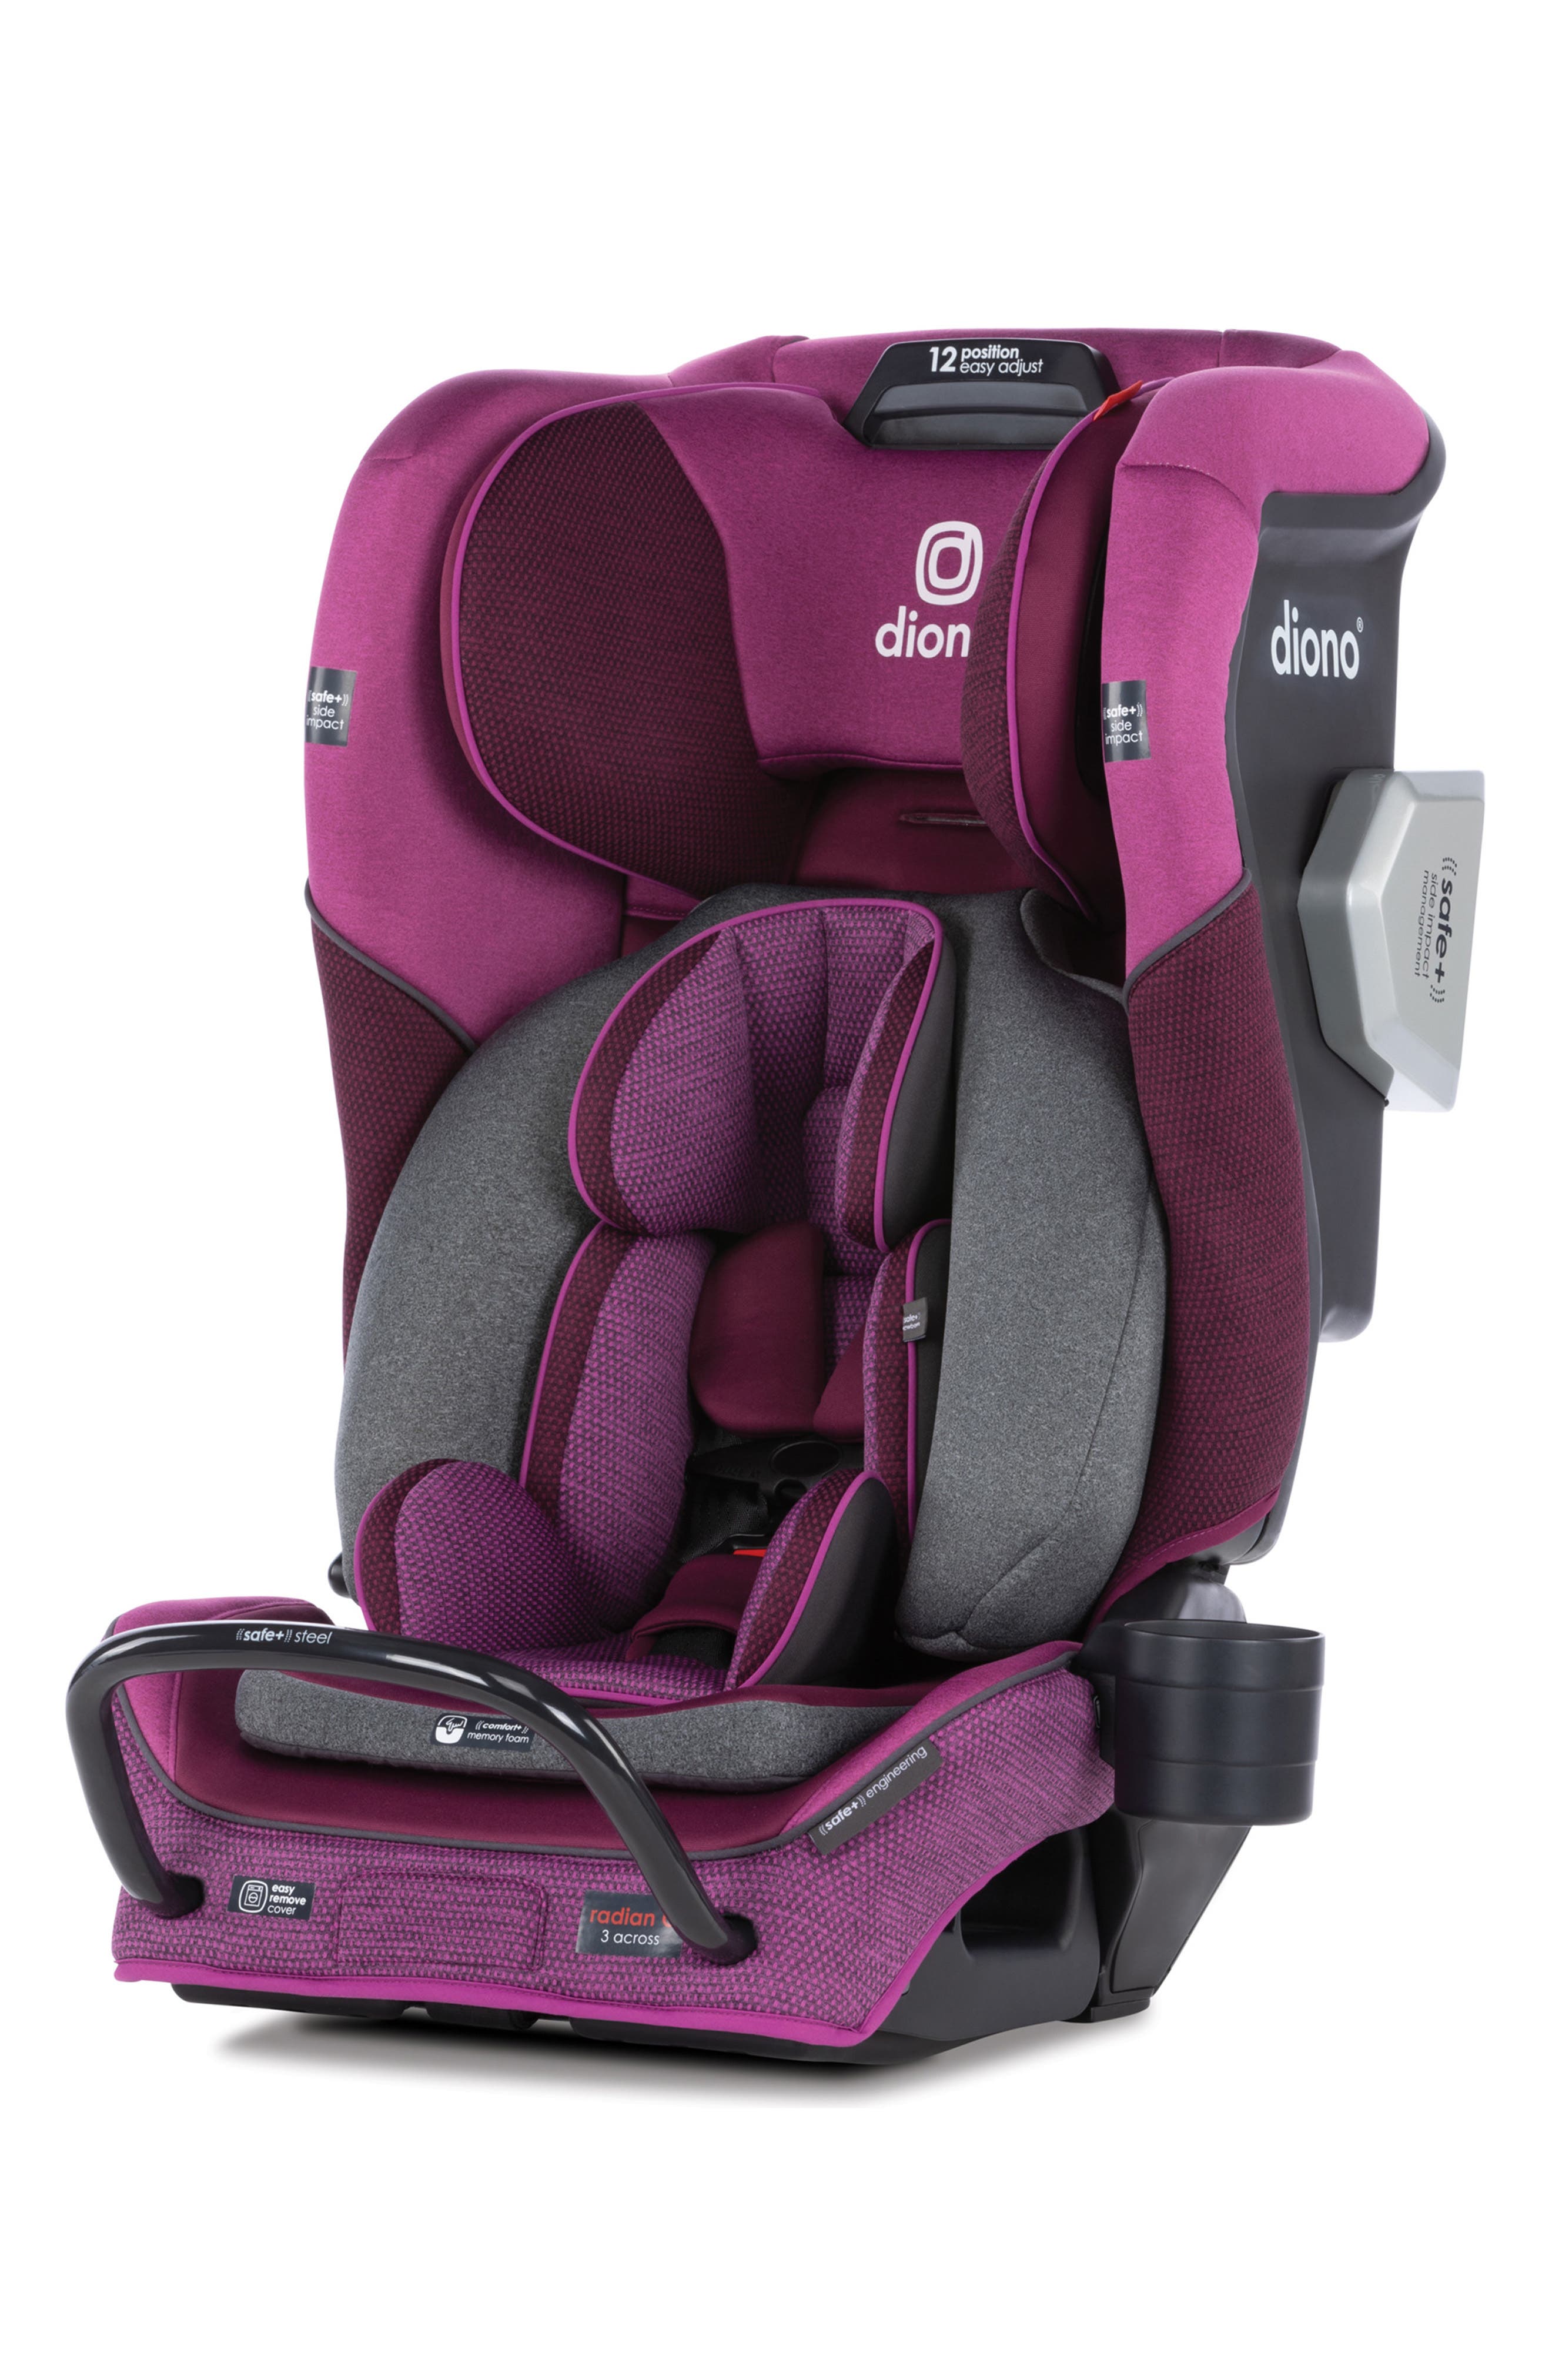 Diono radian(R) 3QXT All-in-One Convertible Car Seat in Purple Plum